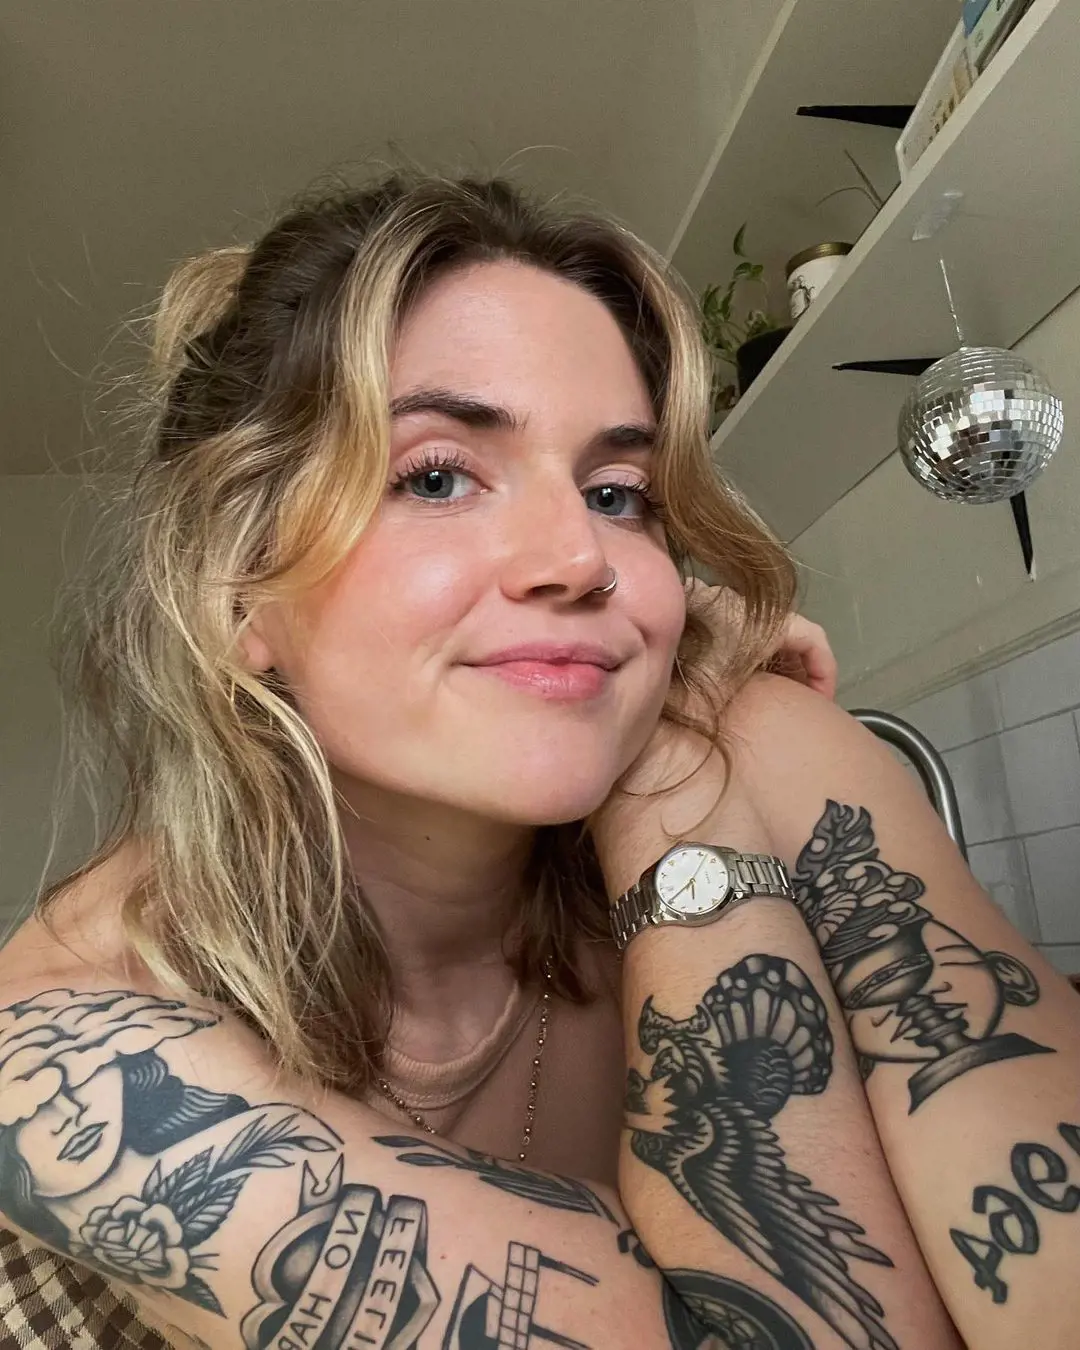 Madison taking selfie showing off her tattoo.